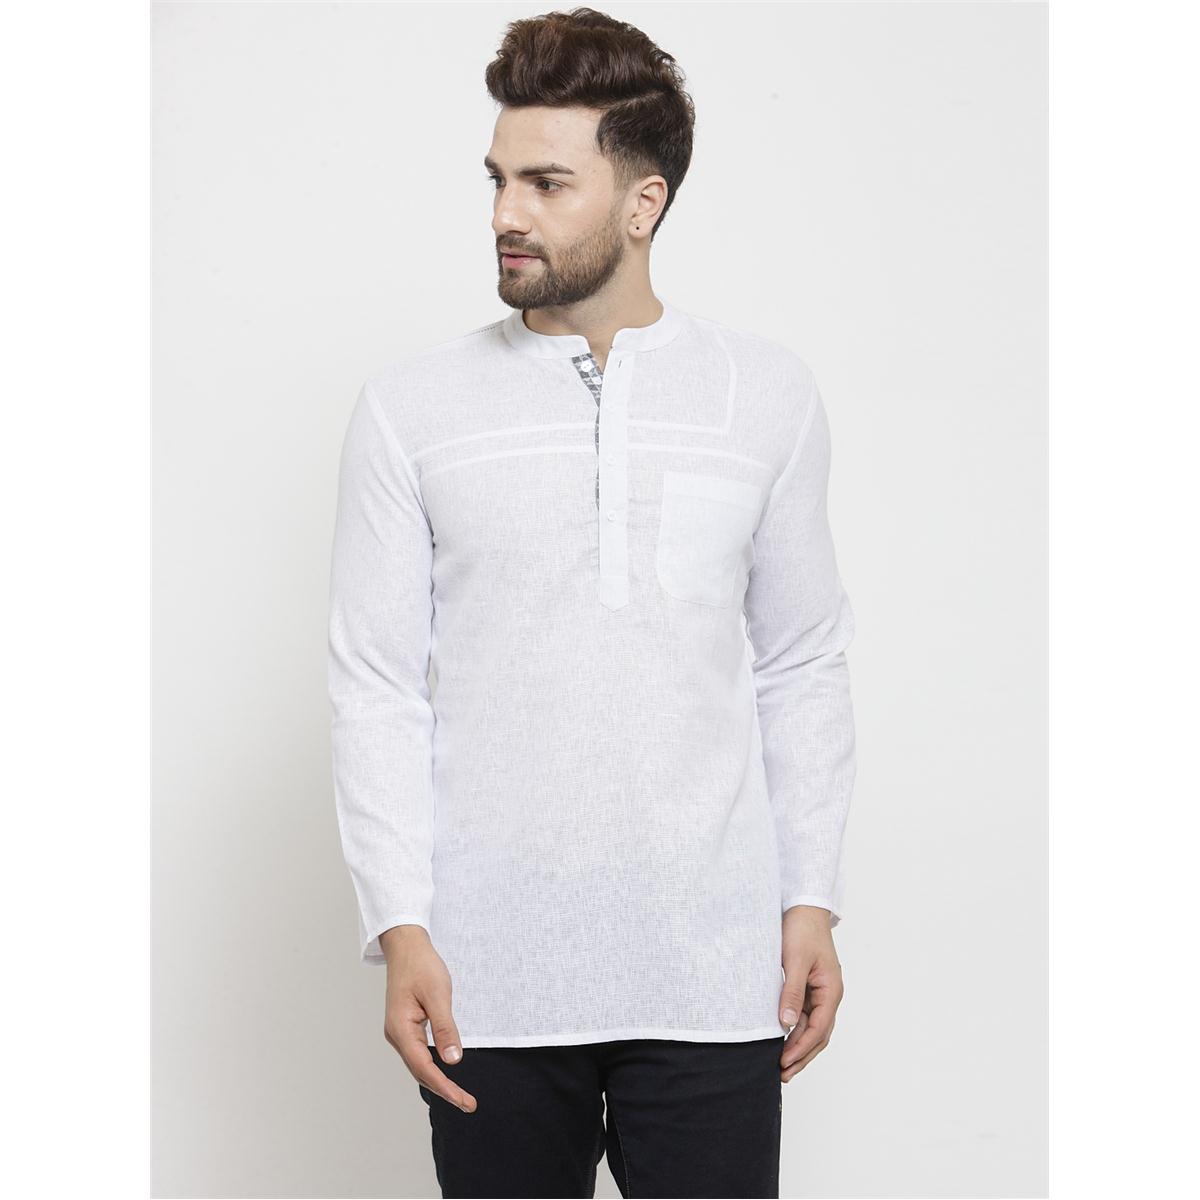 Arch Elements MenS Cotton Designer Short Kurta With Embroidery(White)